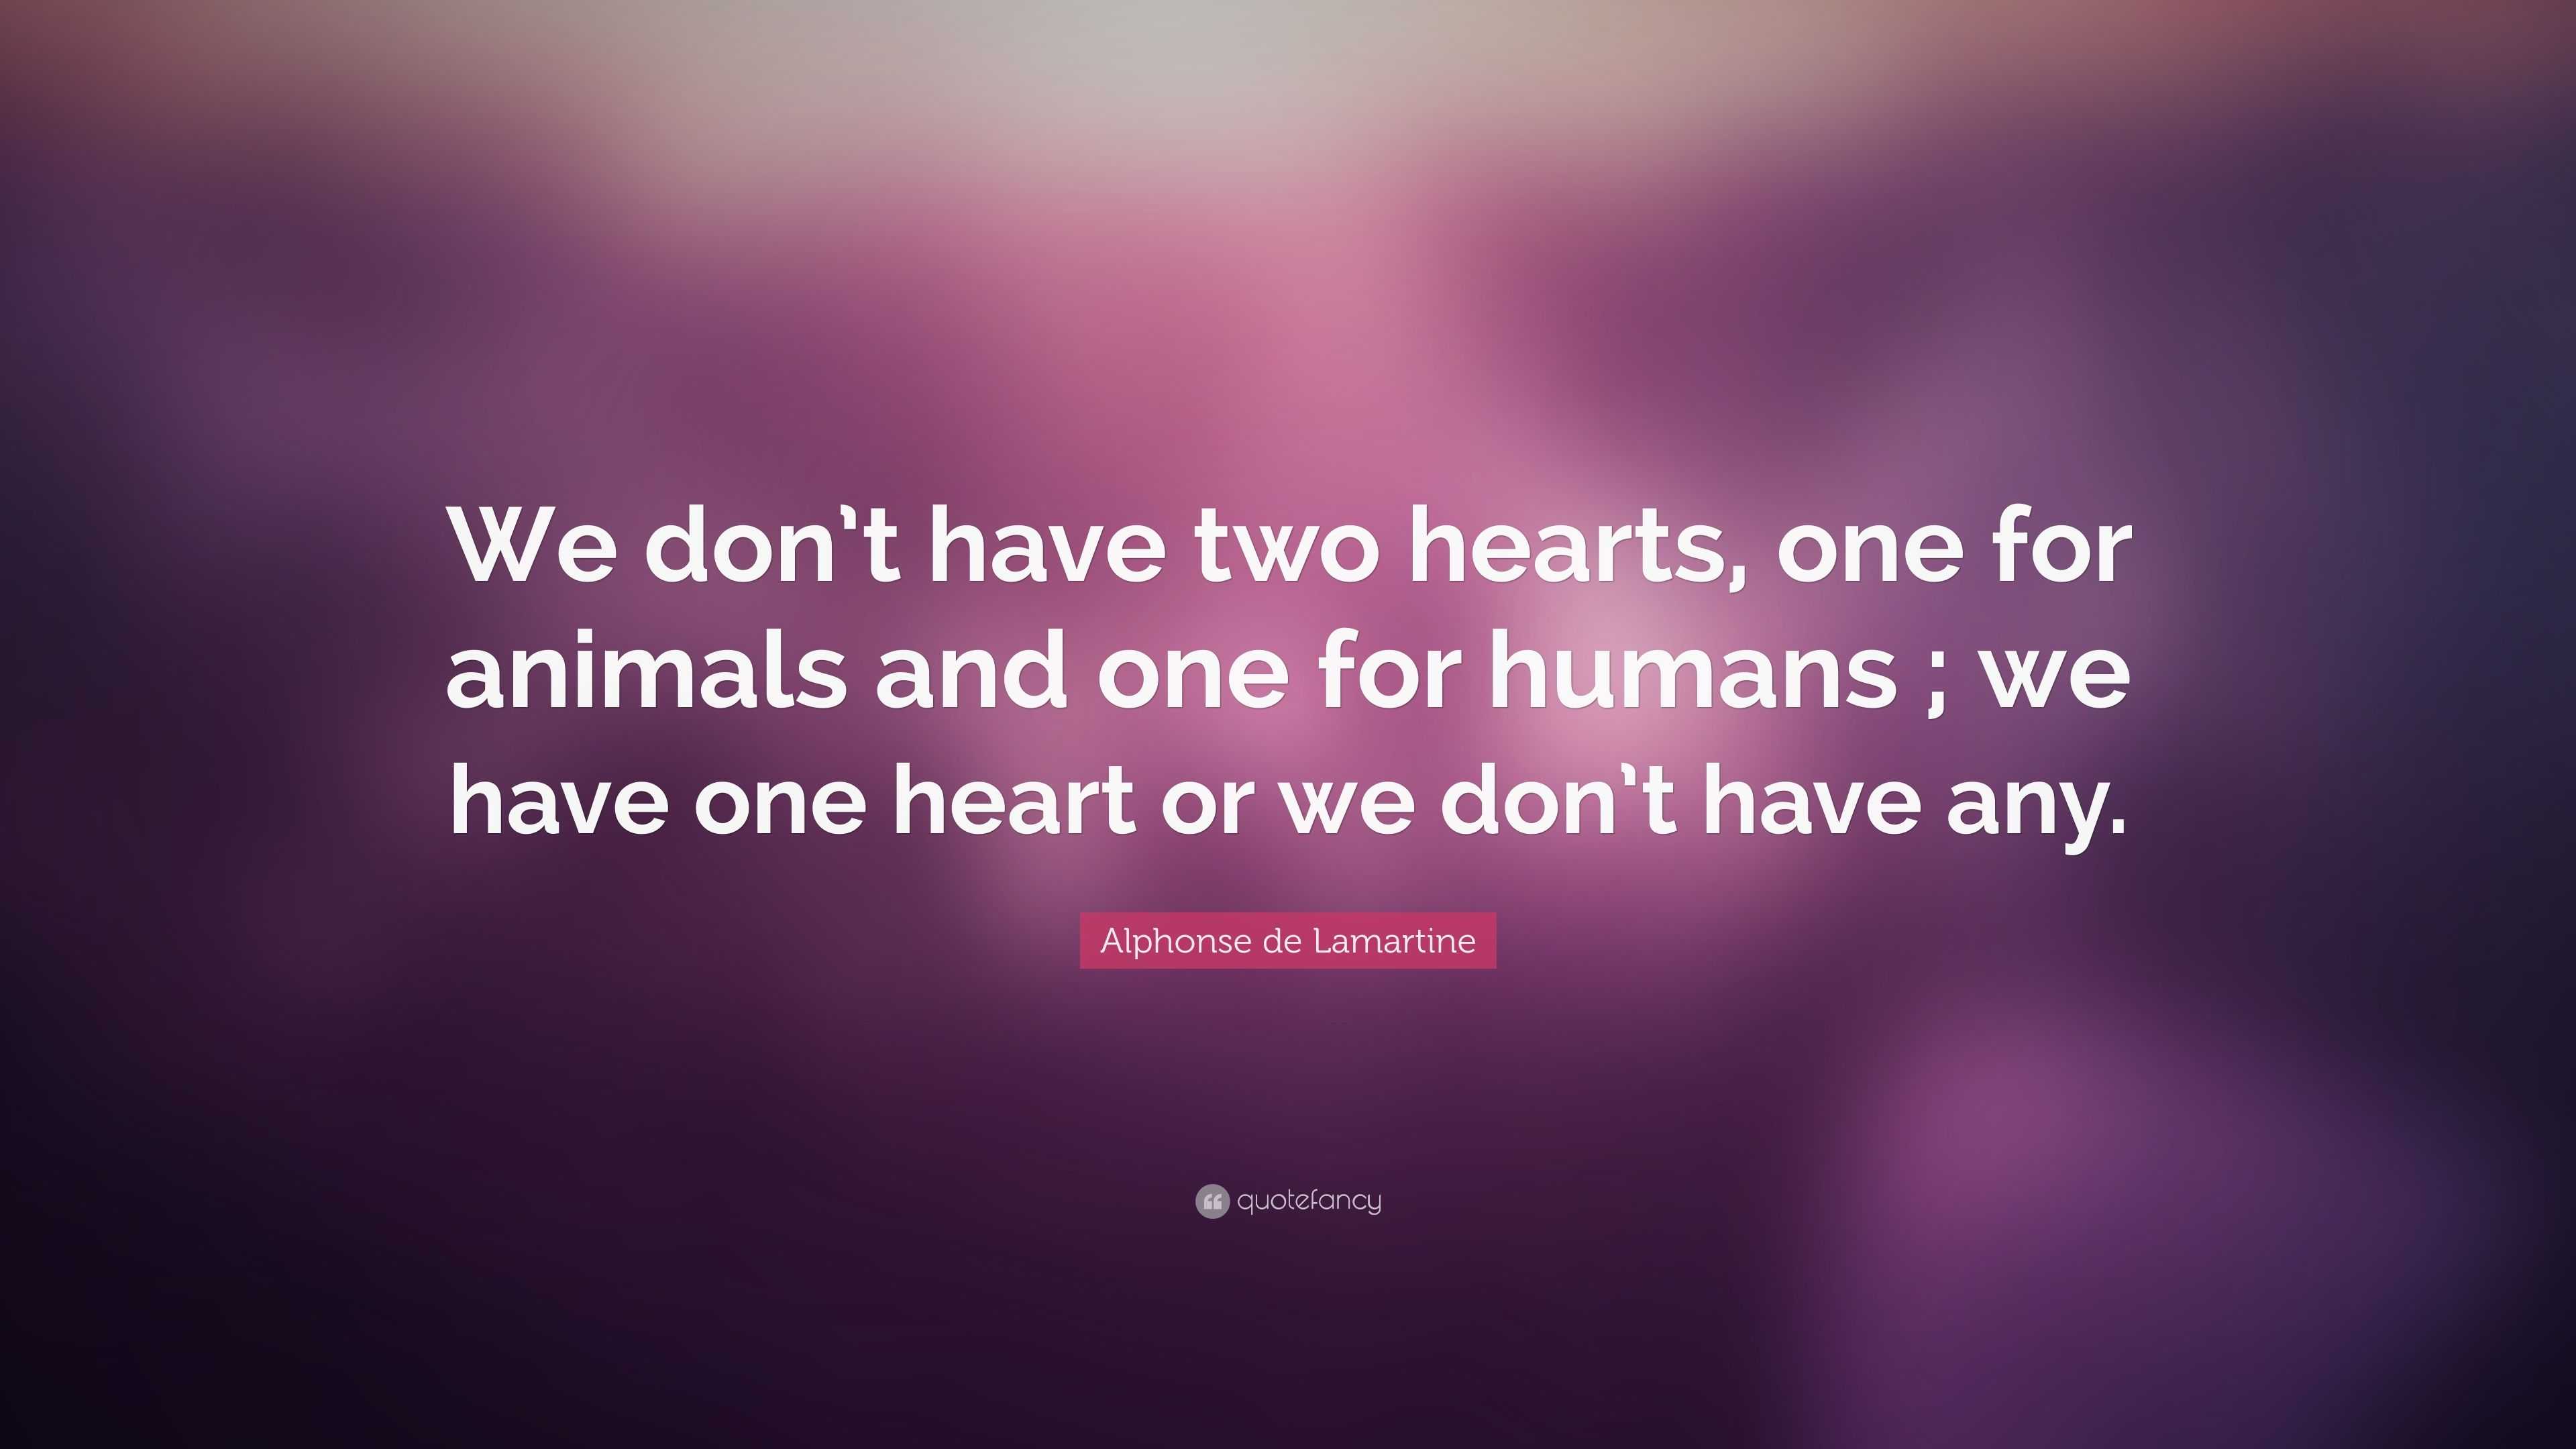 Alphonse de Lamartine Quote: “We don't have two hearts, one for animals and  one for